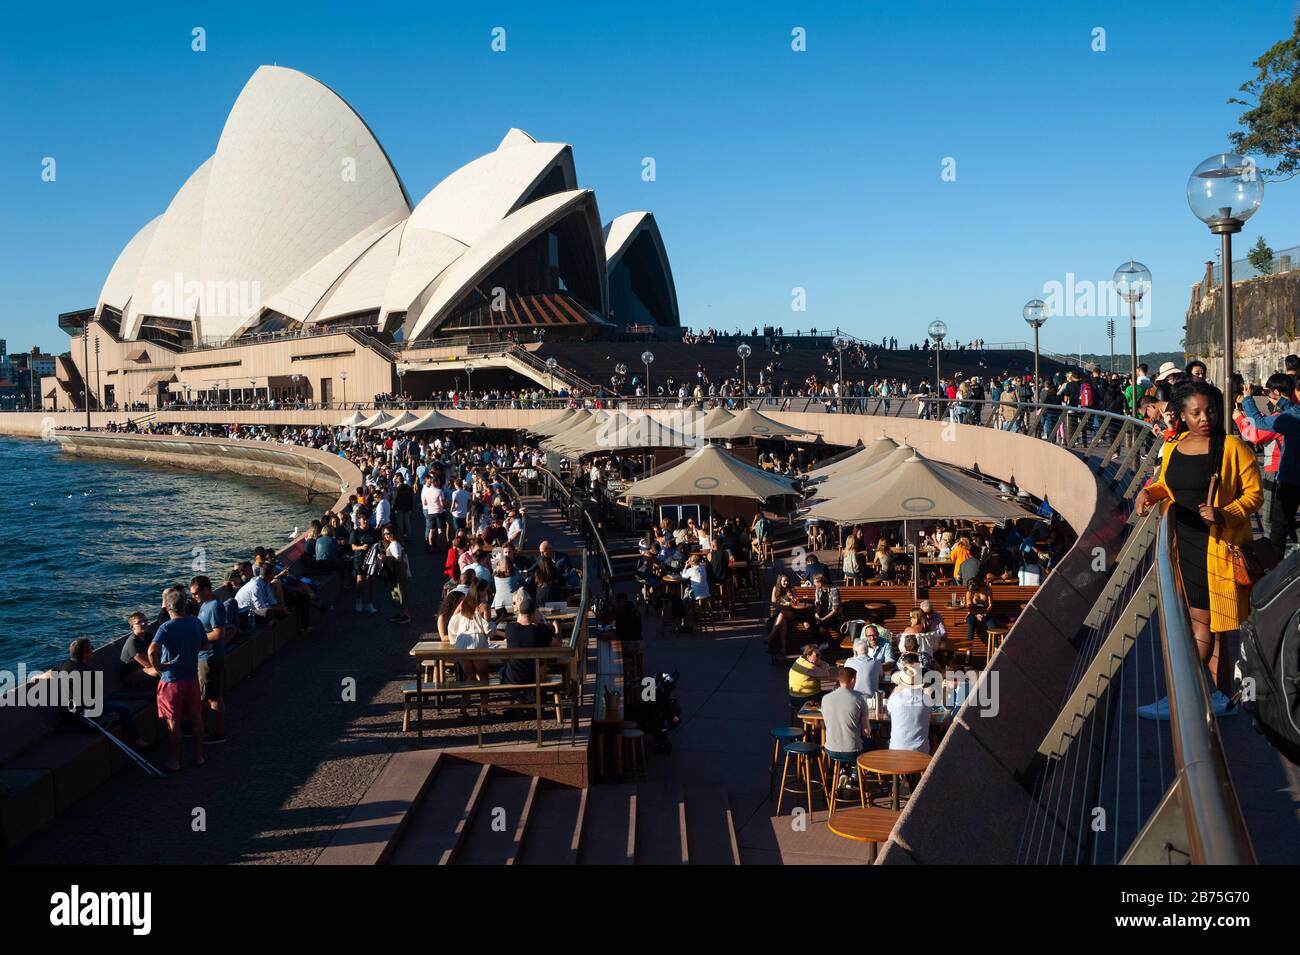 06.05.2018, Sydney, New South Wales, Australia - A view of the Sydney Opera House at Bennelong Point with the Opera Bar in the foreground. [automated translation] Stock Photo